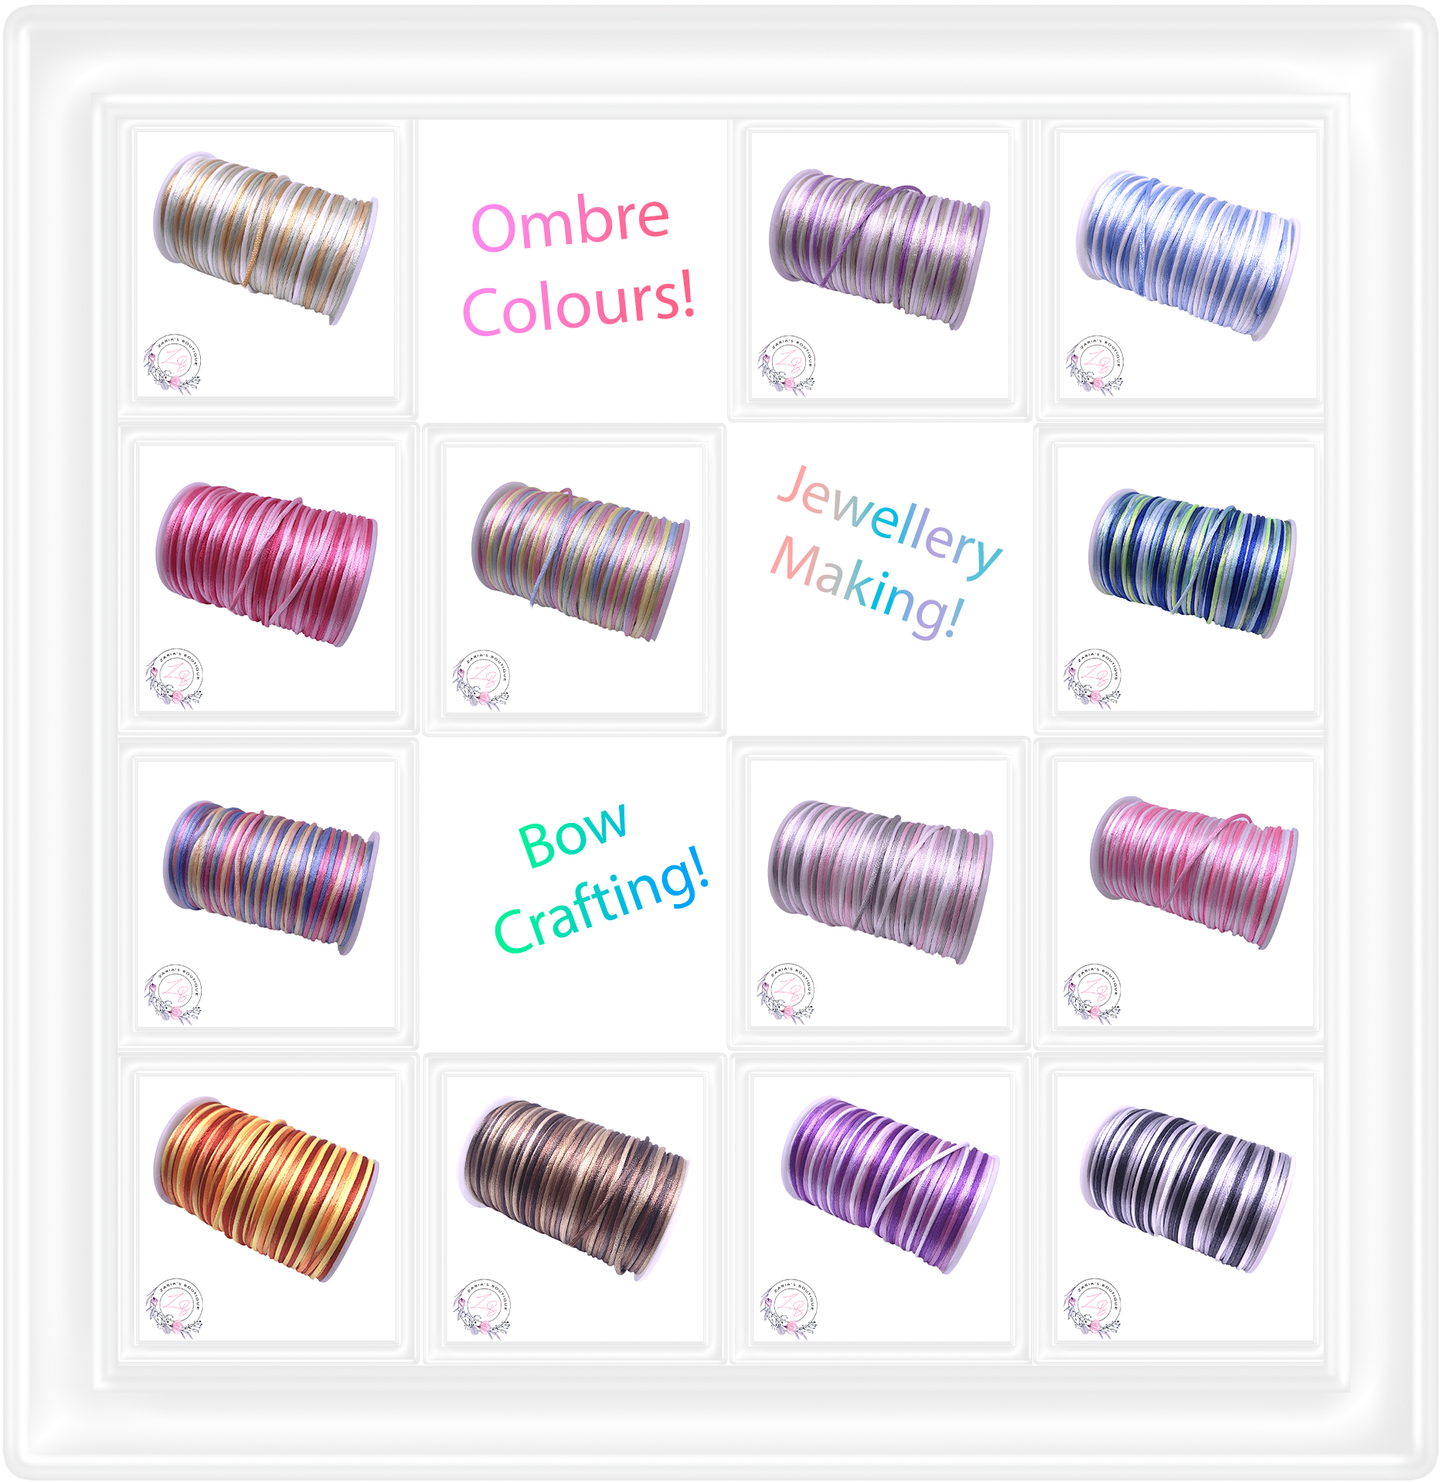 ⋅ Silky Satin Cord ⋅ Ombre Pastels ⋅ 2.0mm ⋅ 5 yards ⋅